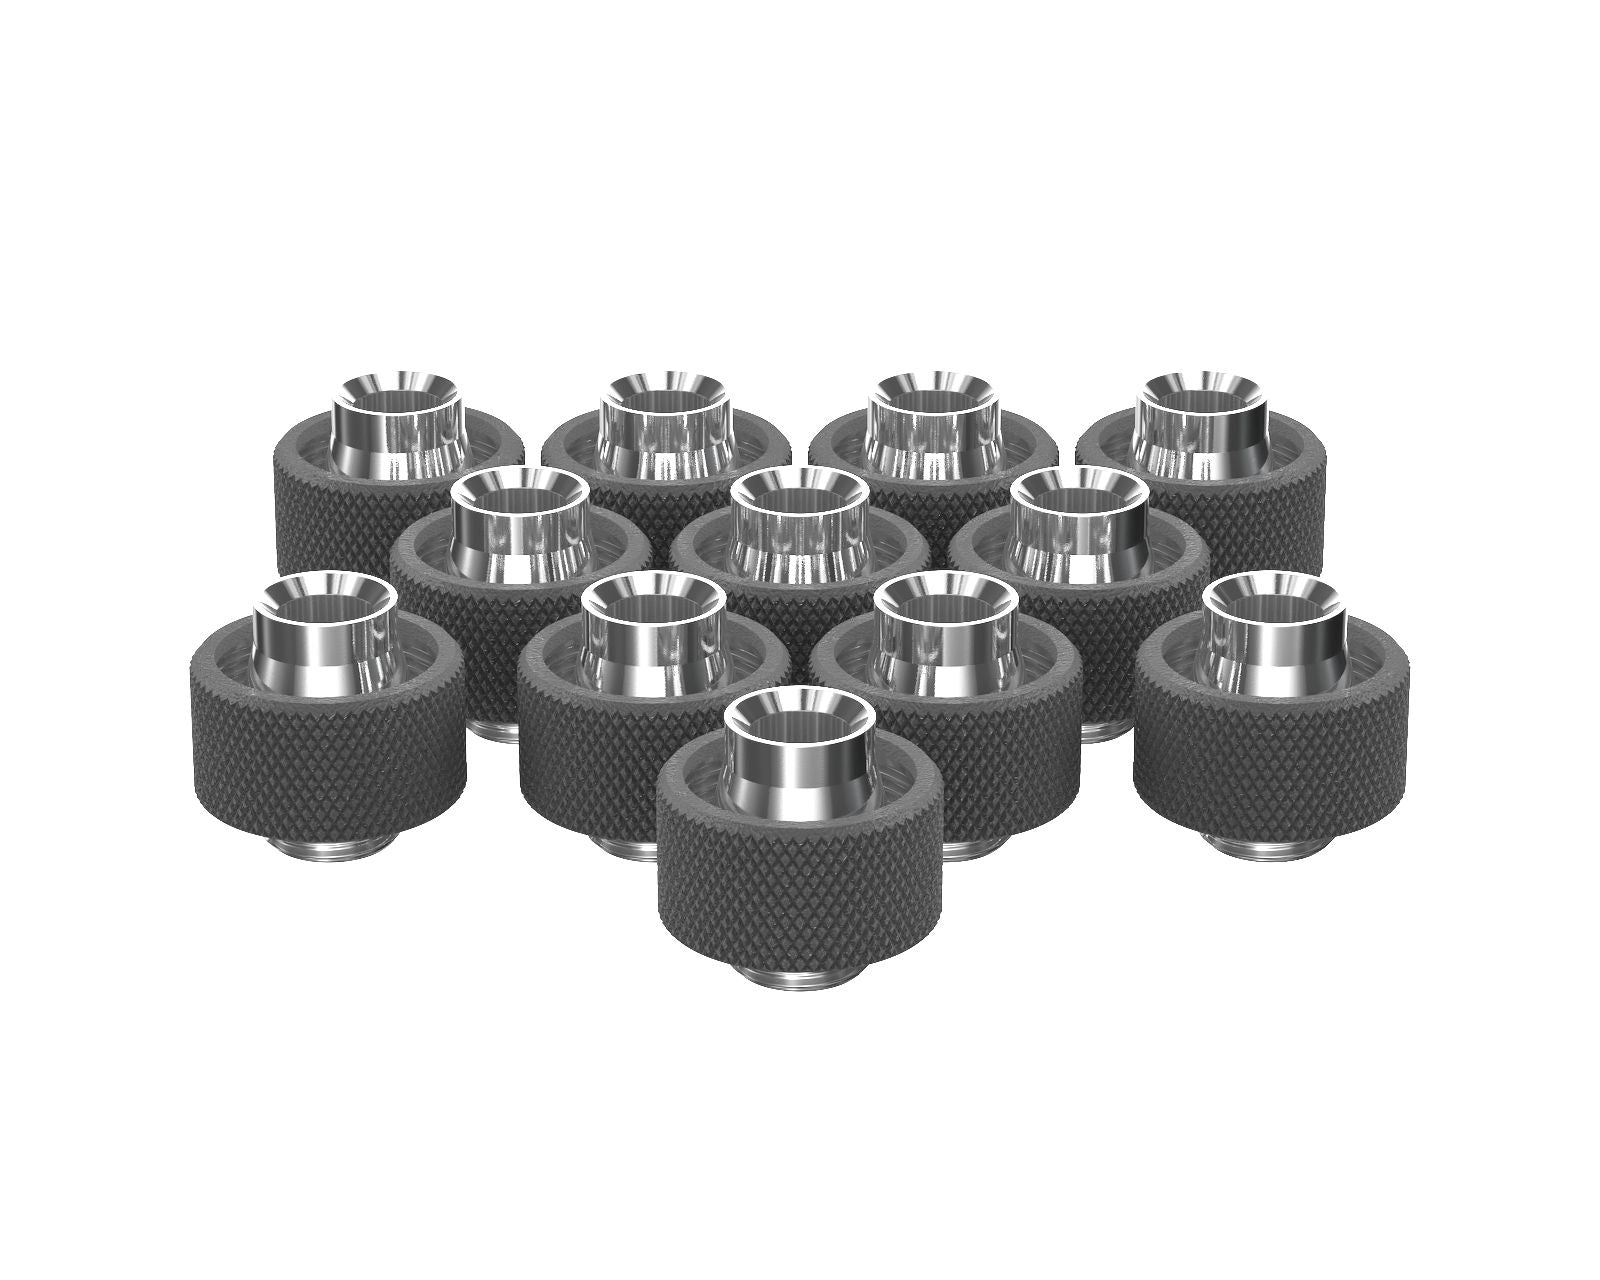 PrimoChill SecureFit SX - Premium Compression Fittings 12 Pack - For 1/2in ID x 3/4in OD Flexible Tubing (F-SFSX34-12) - Available in 20+ Colors, Custom Watercooling Loop Ready - TX Matte Gun Metal